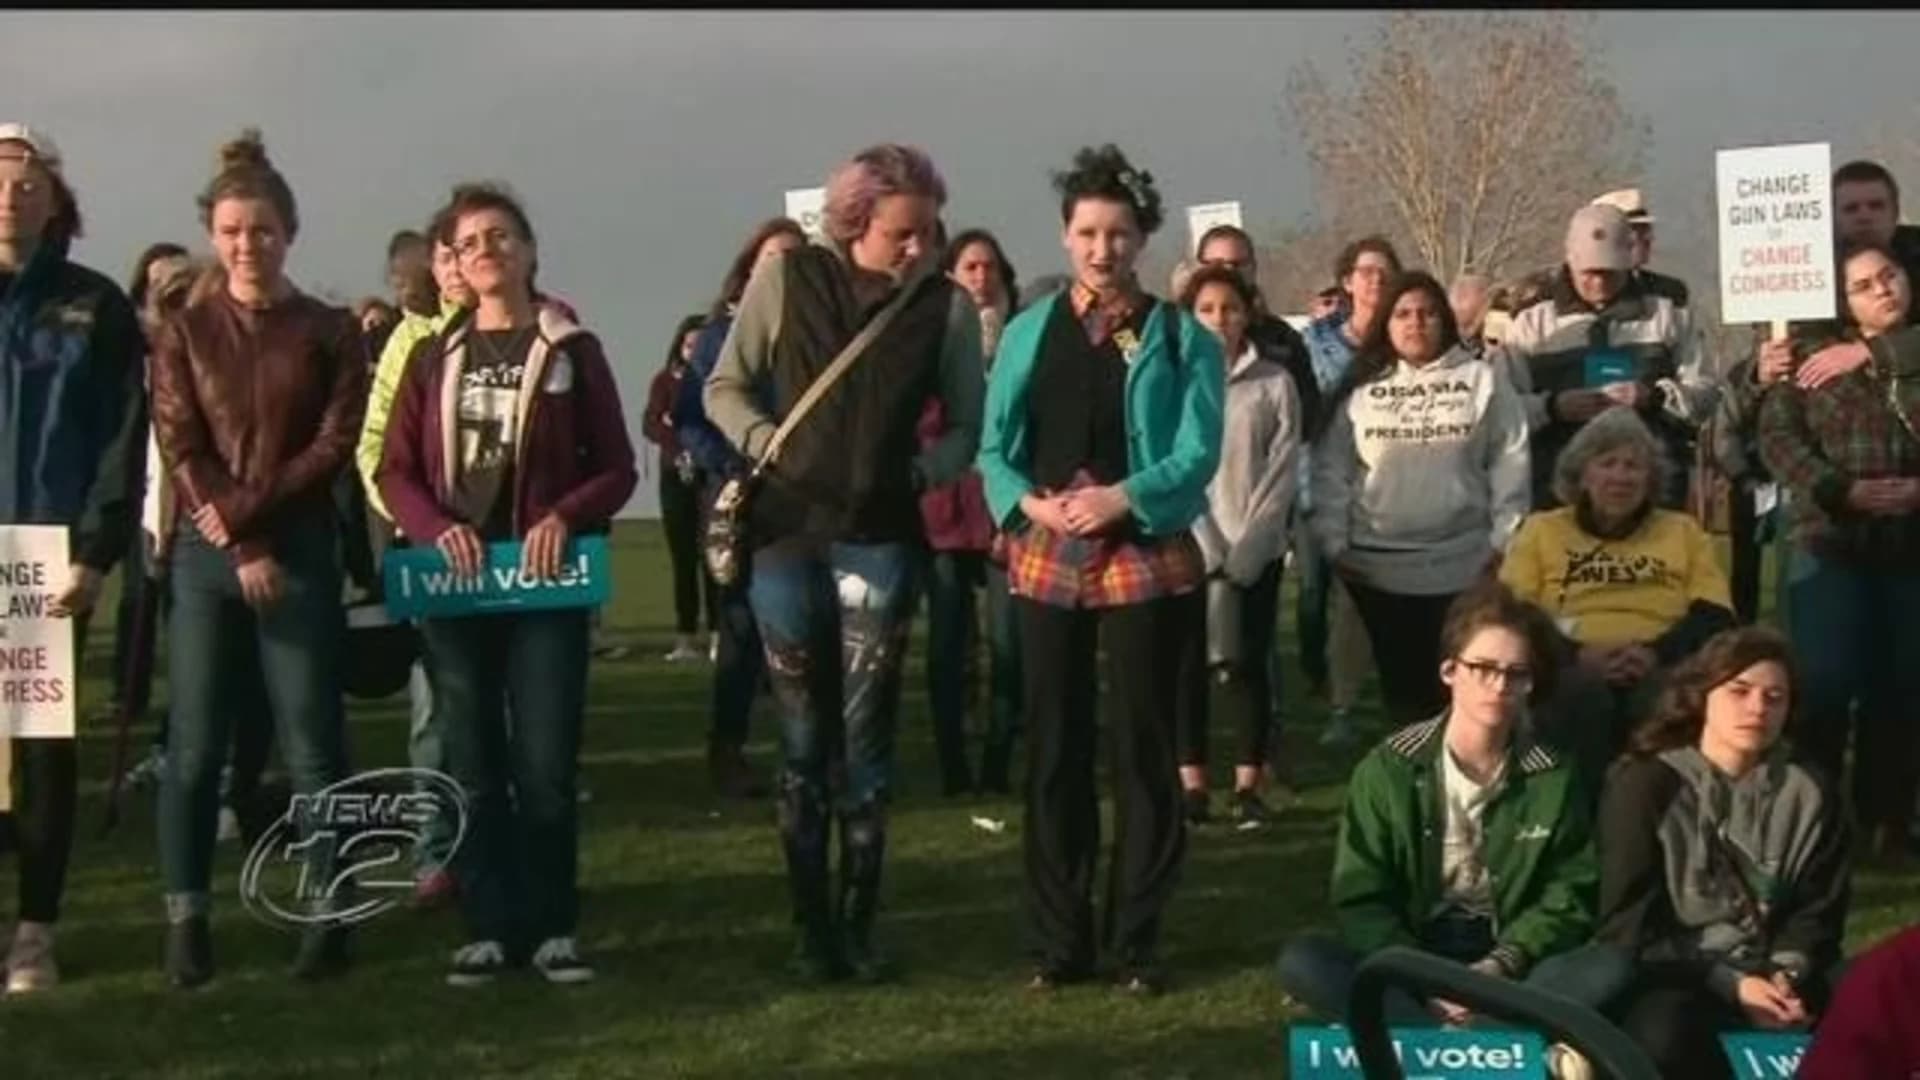 Students walk out to mark 19 years since Columbine shooting